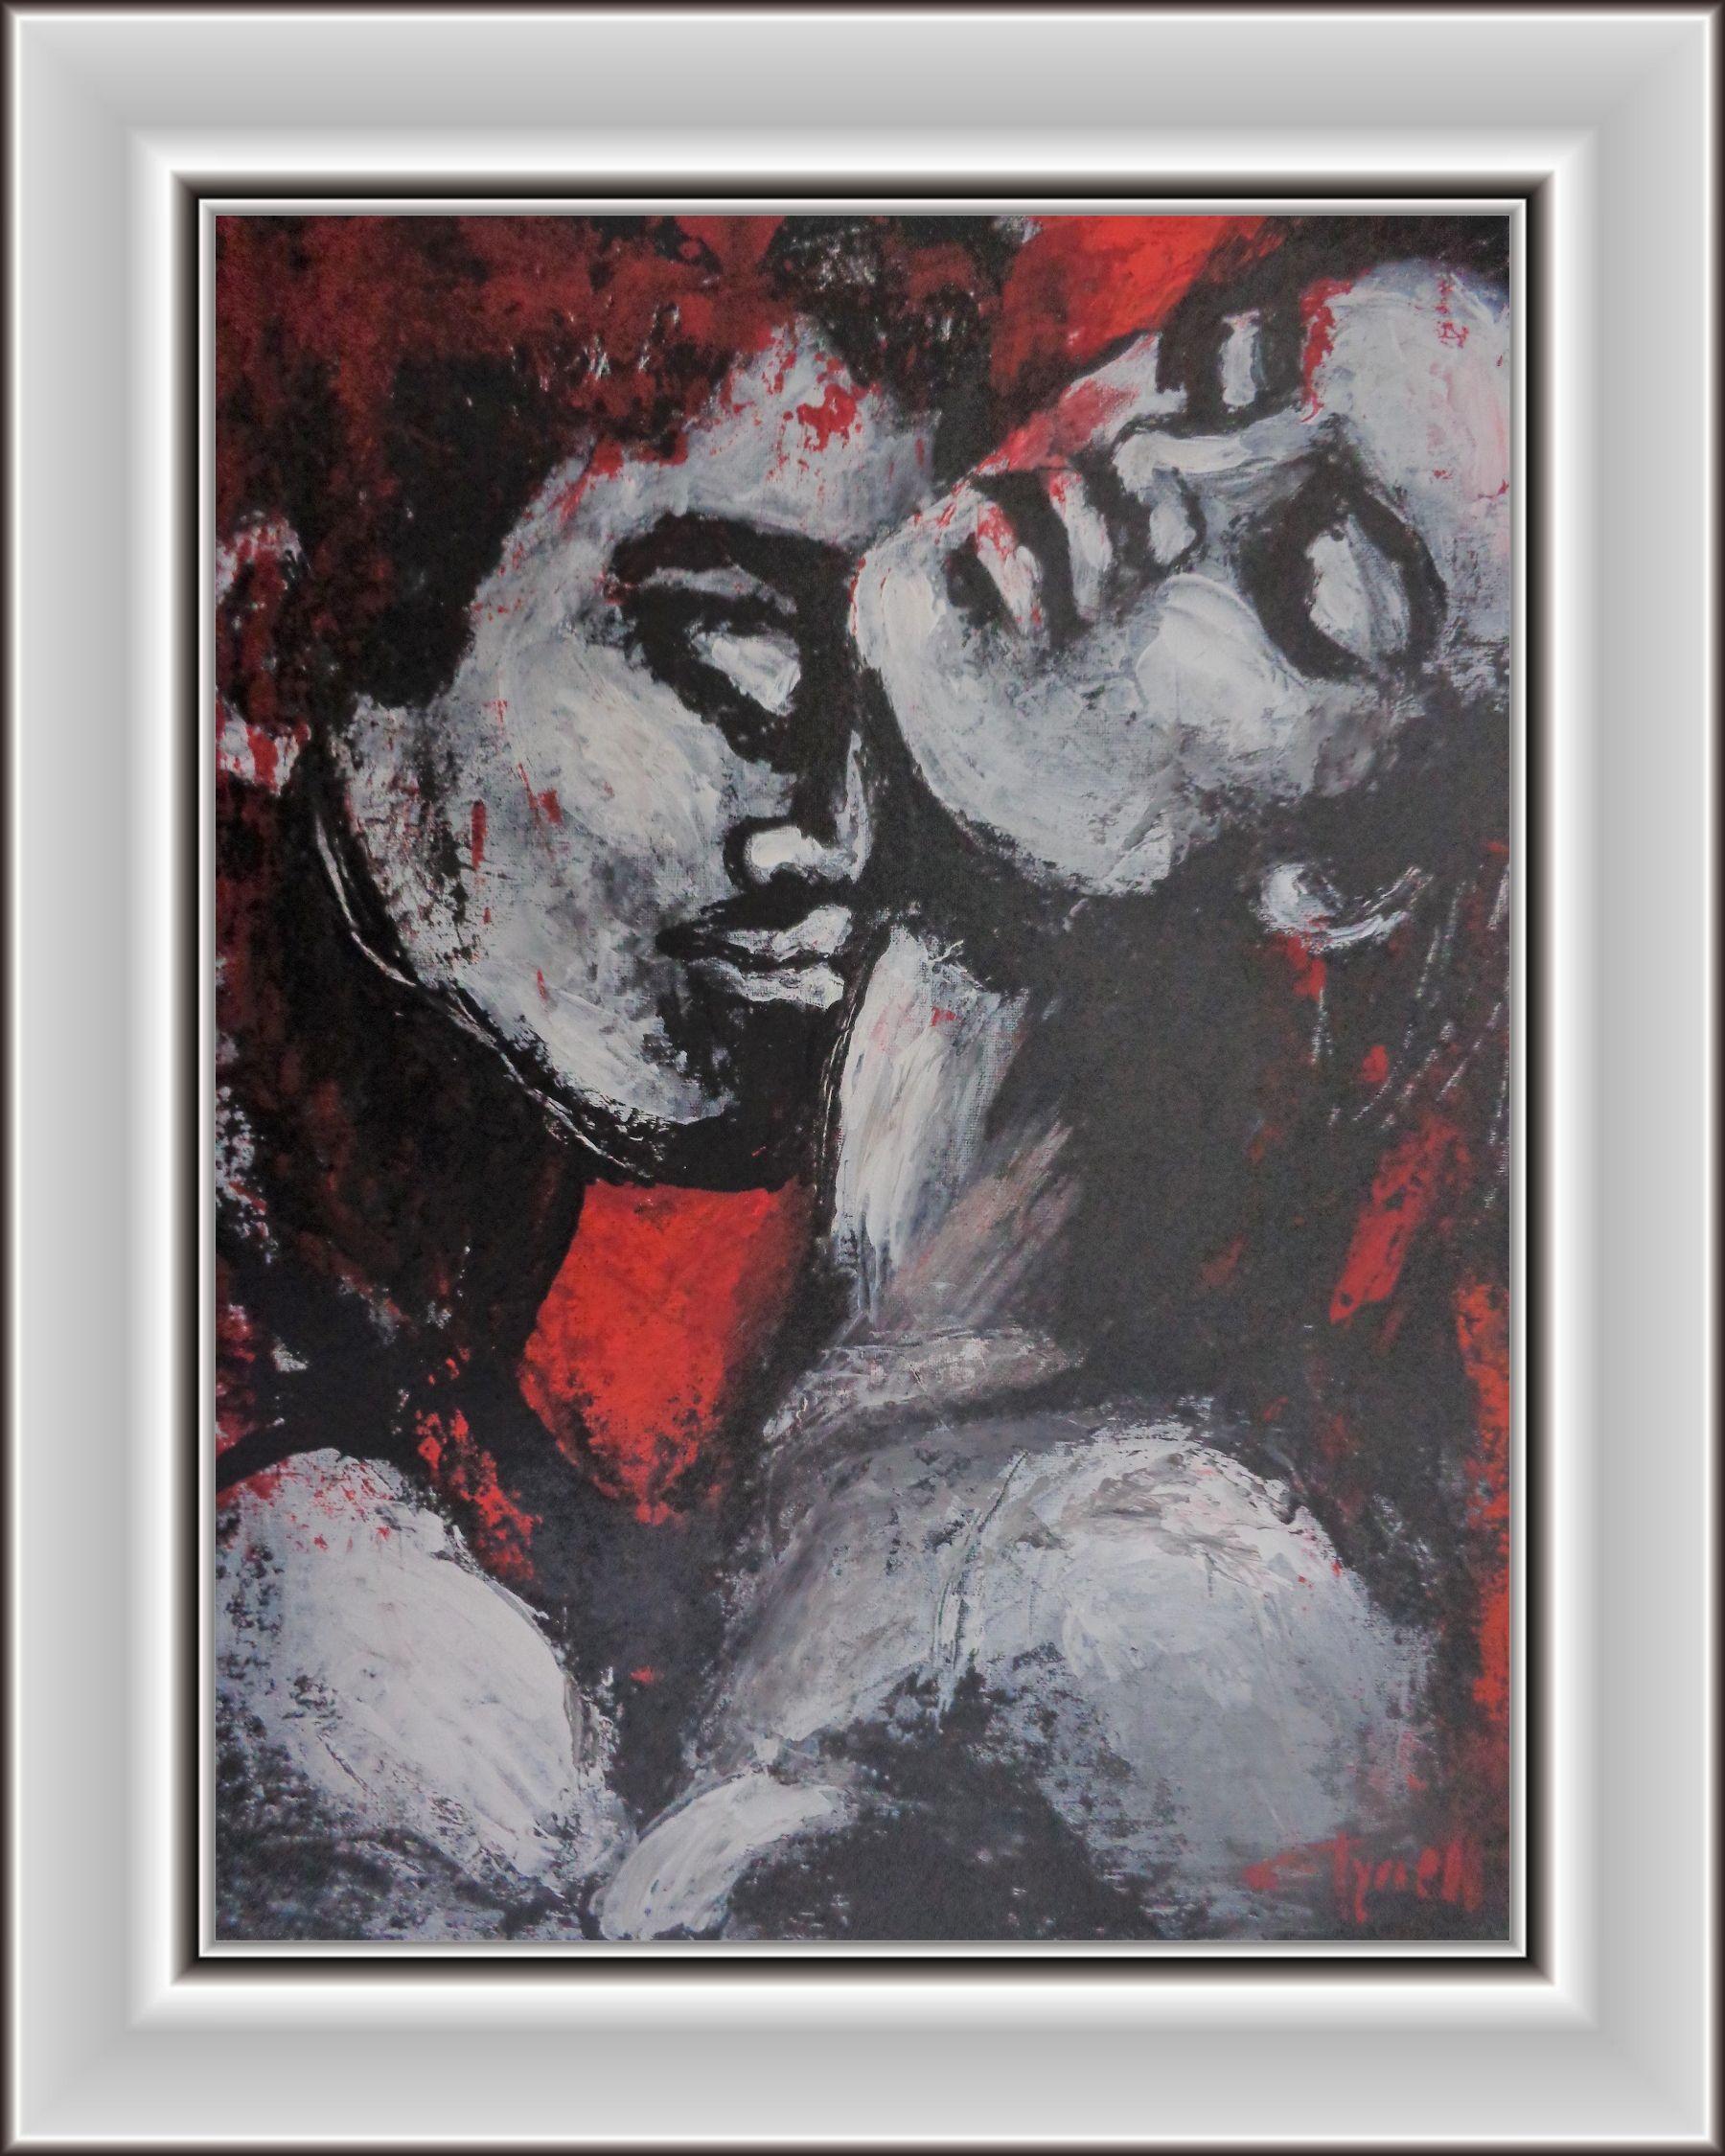 Original figurative acrylics painting on canvas board, unframed, part of a new series. Powerful image of a man passionately kissing a woman on her neck.  Textured painting made using black, white and red acrylics applied with a palette knife. Size